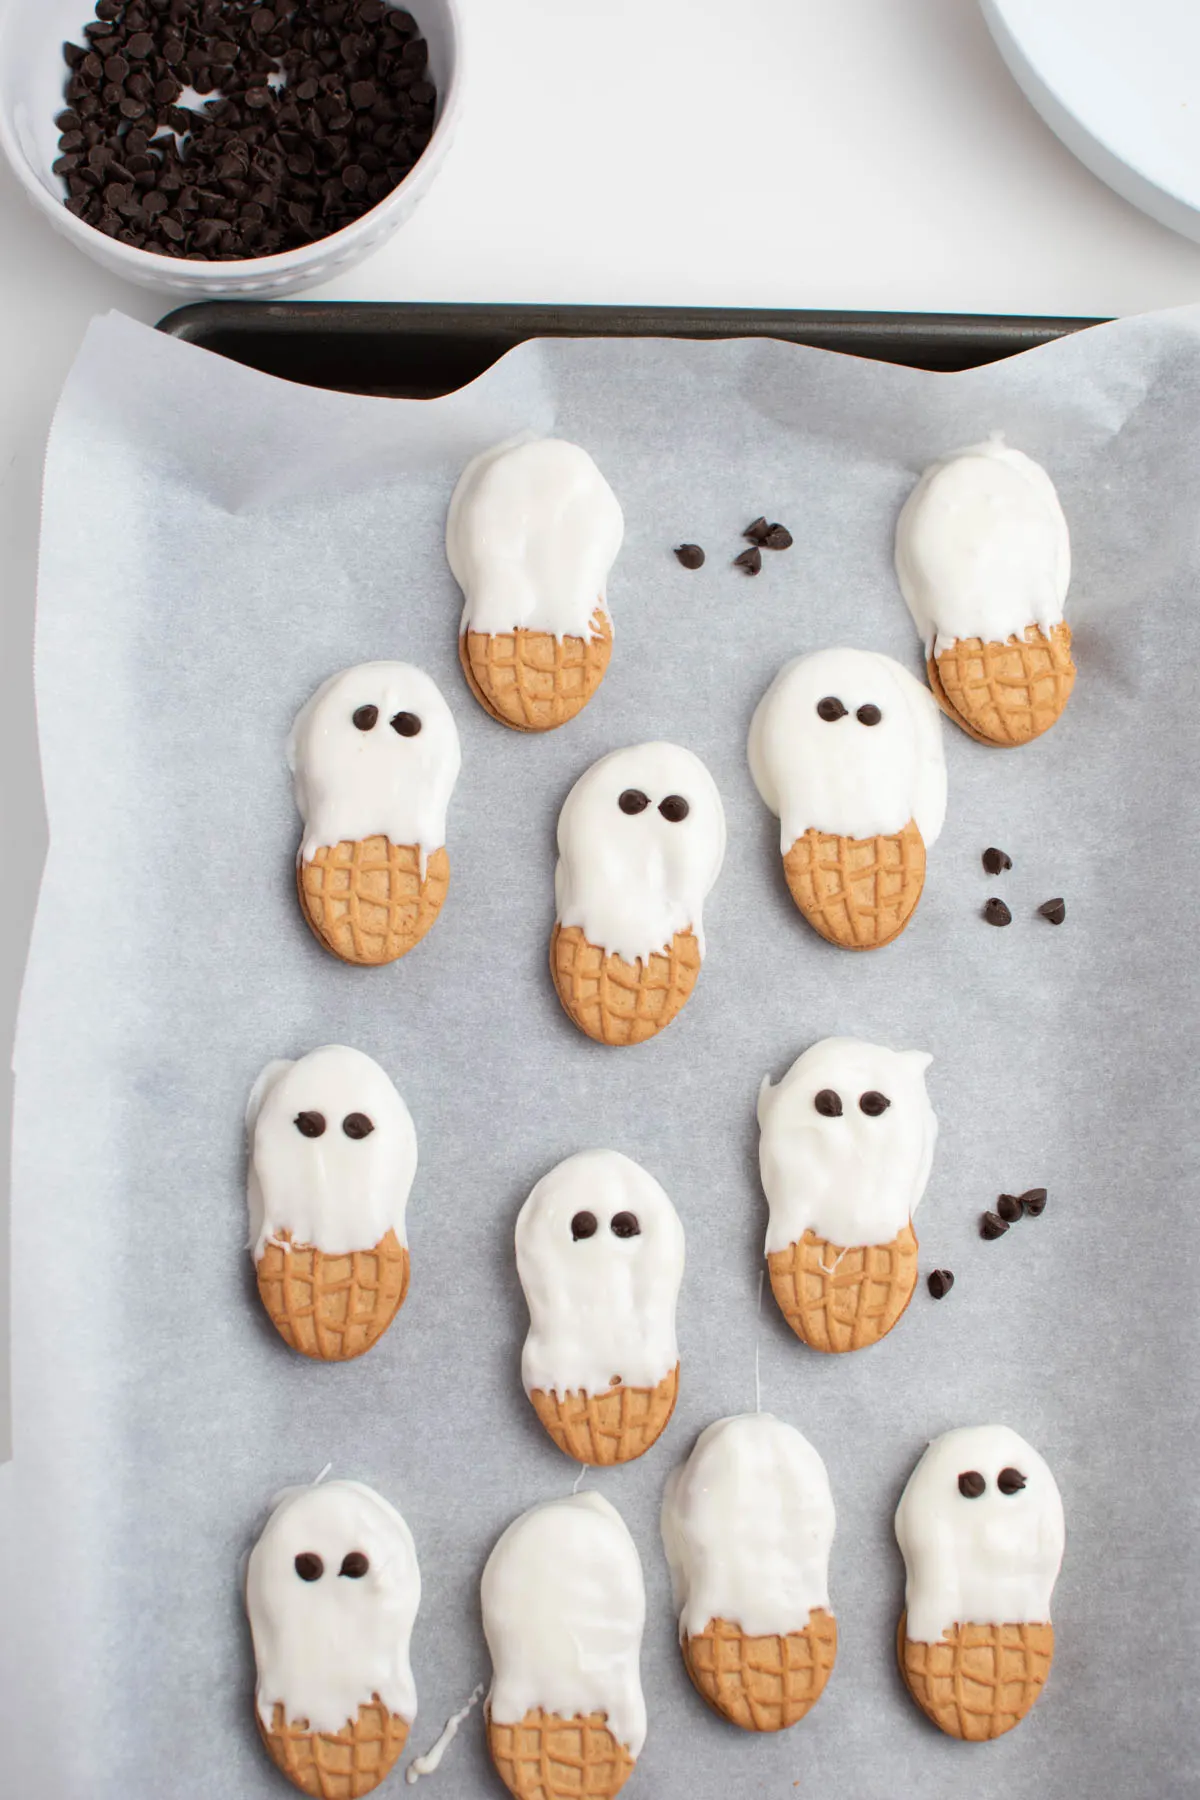 White chocolate dipped cookies on parchment paper with mini chocolate chips for eyes.